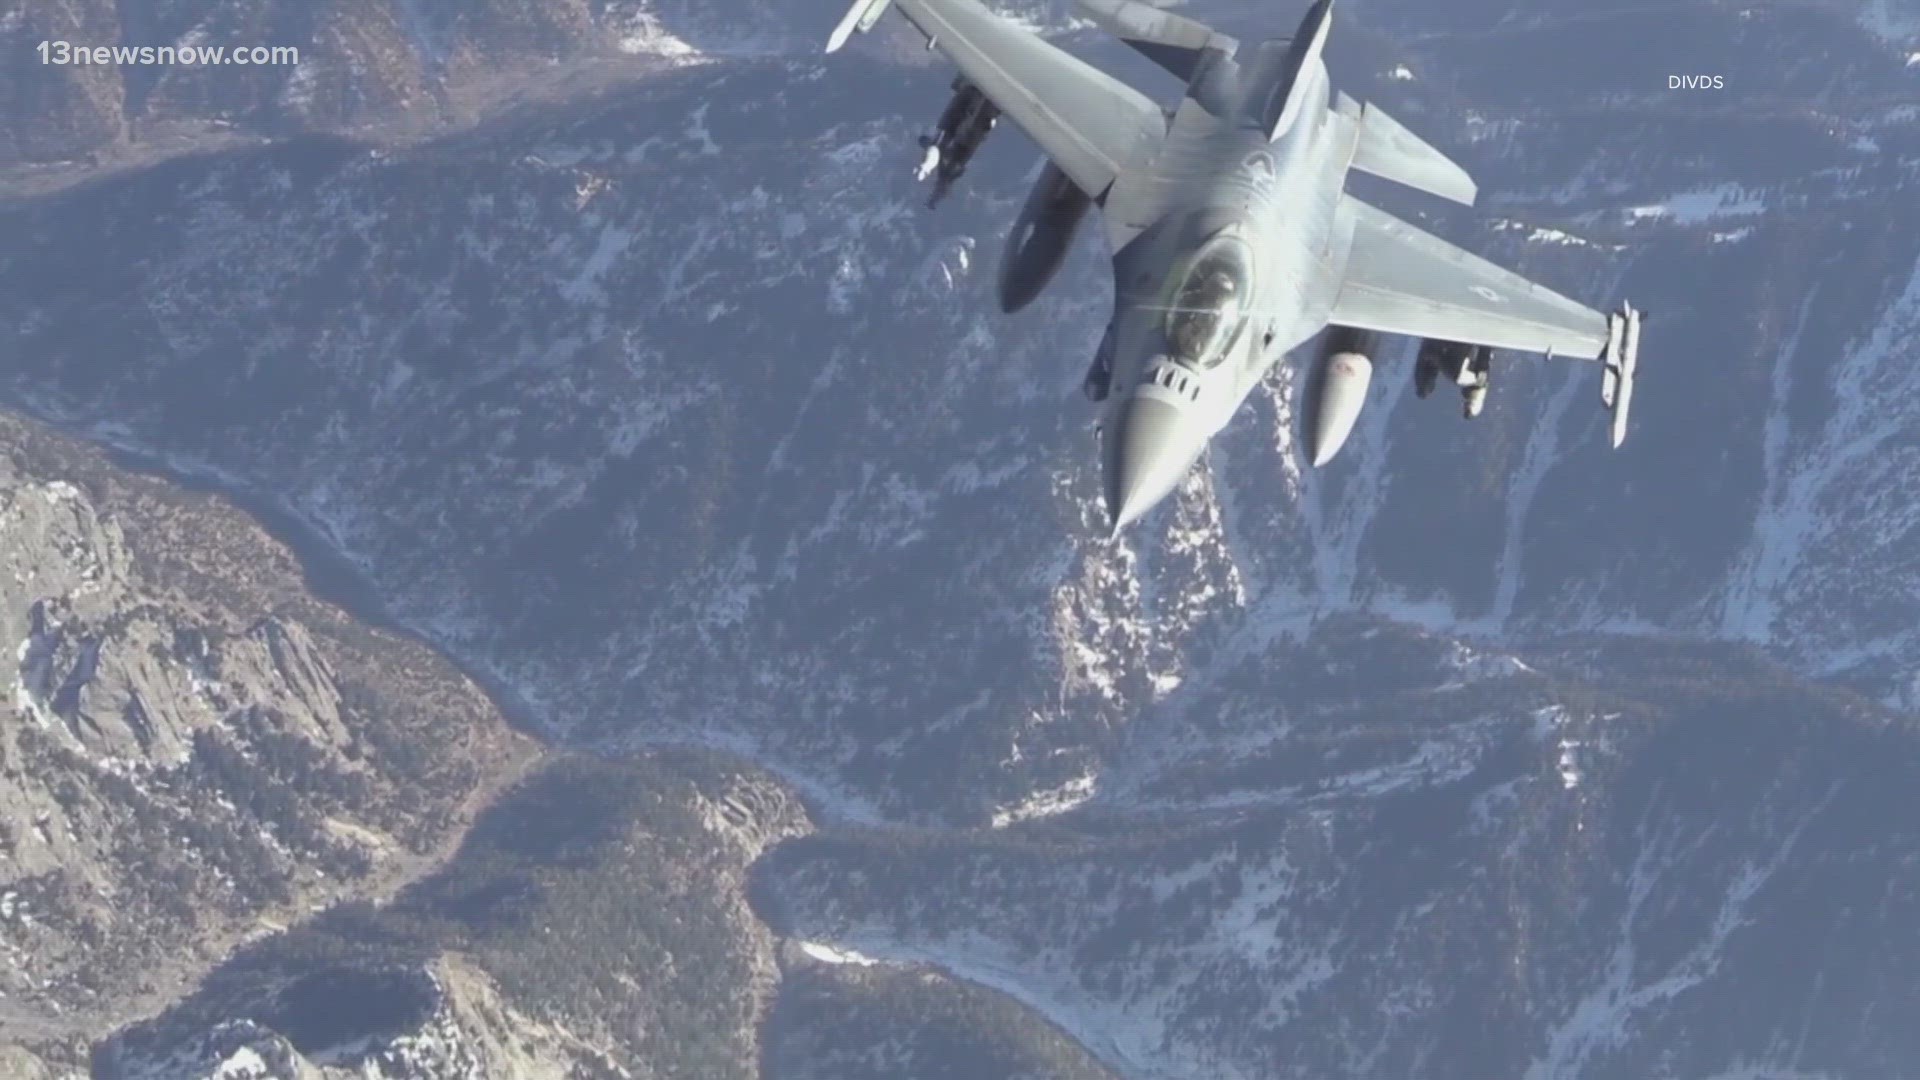 A U.S. Air Force F-16 fighter jet shot down an armed Turkish drone.